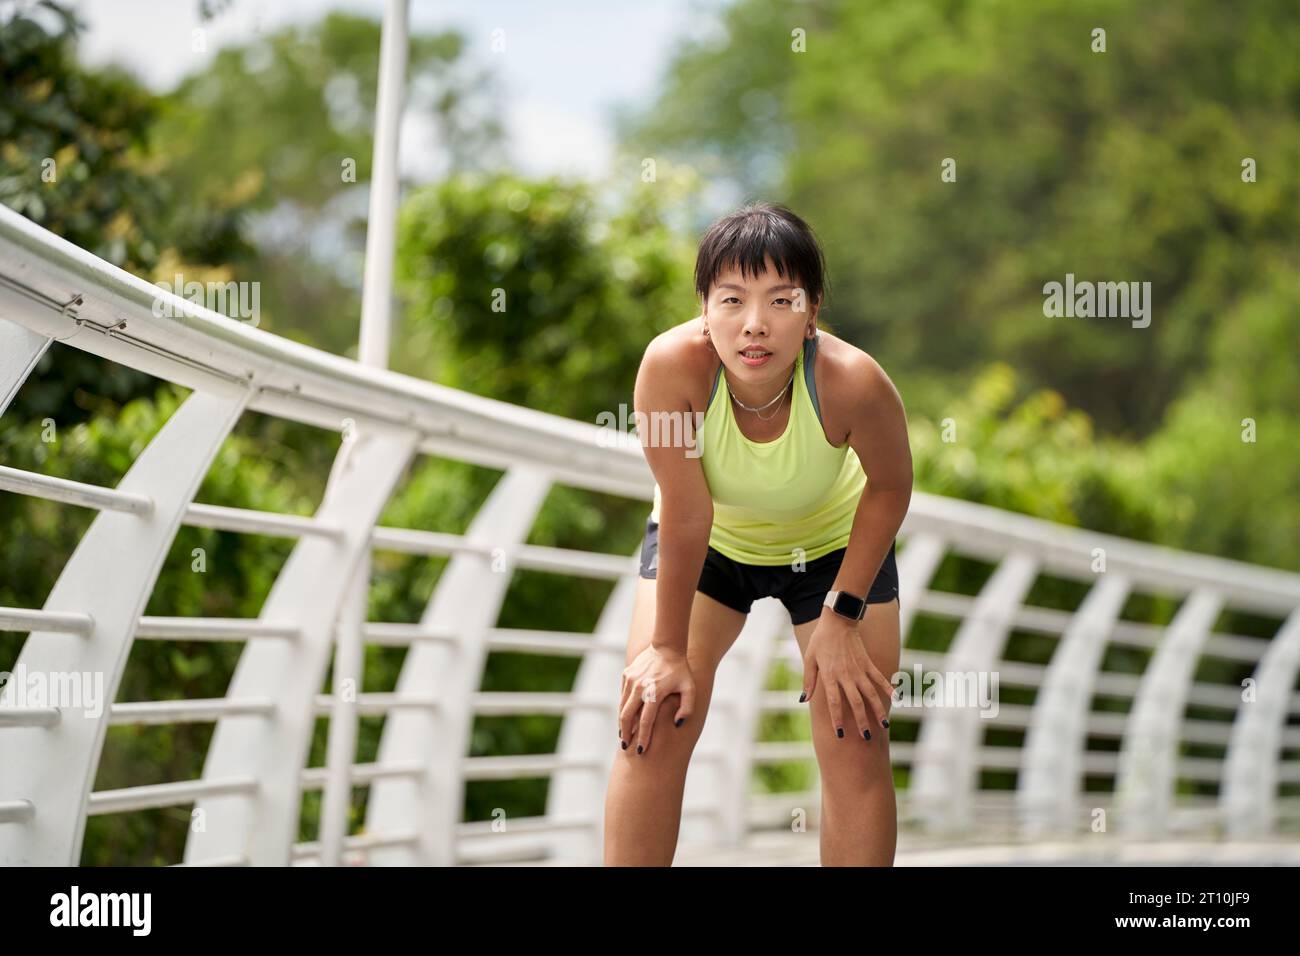 Sport Fitness Woman Running In Park On Summer Day. Asian Female Runner  During Outdoor Workout. Fit Sport Fitness Model Of Mixed Asian / Caucasian  Ethnicity. Stock Photo, Picture and Royalty Free Image.